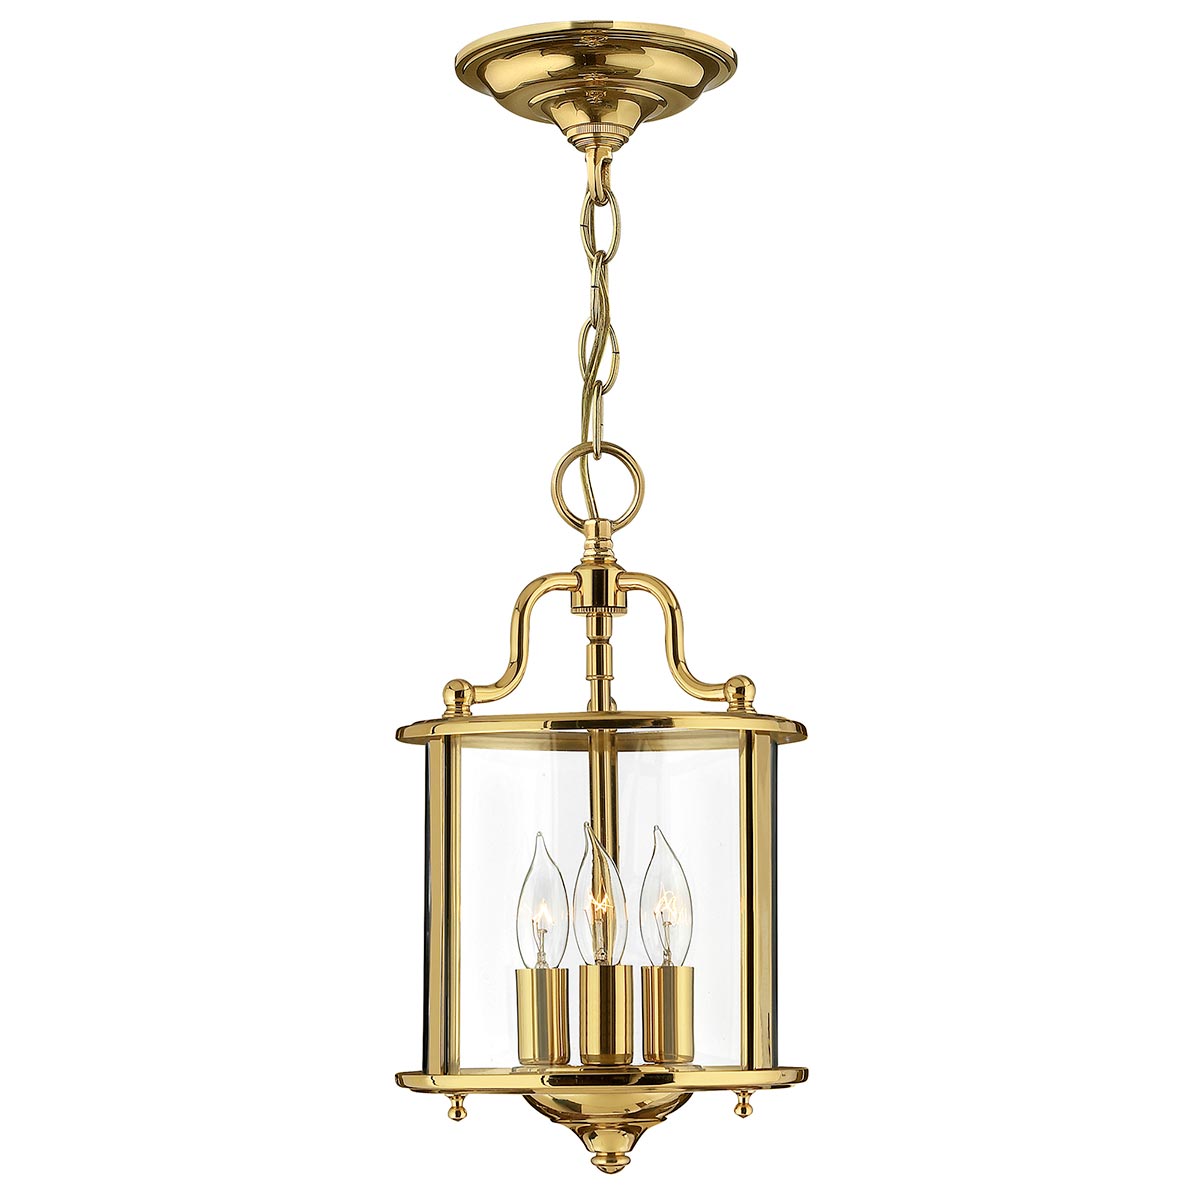 Hinkley Gentry 3 Light Solid Polished Brass Small Hanging Lantern